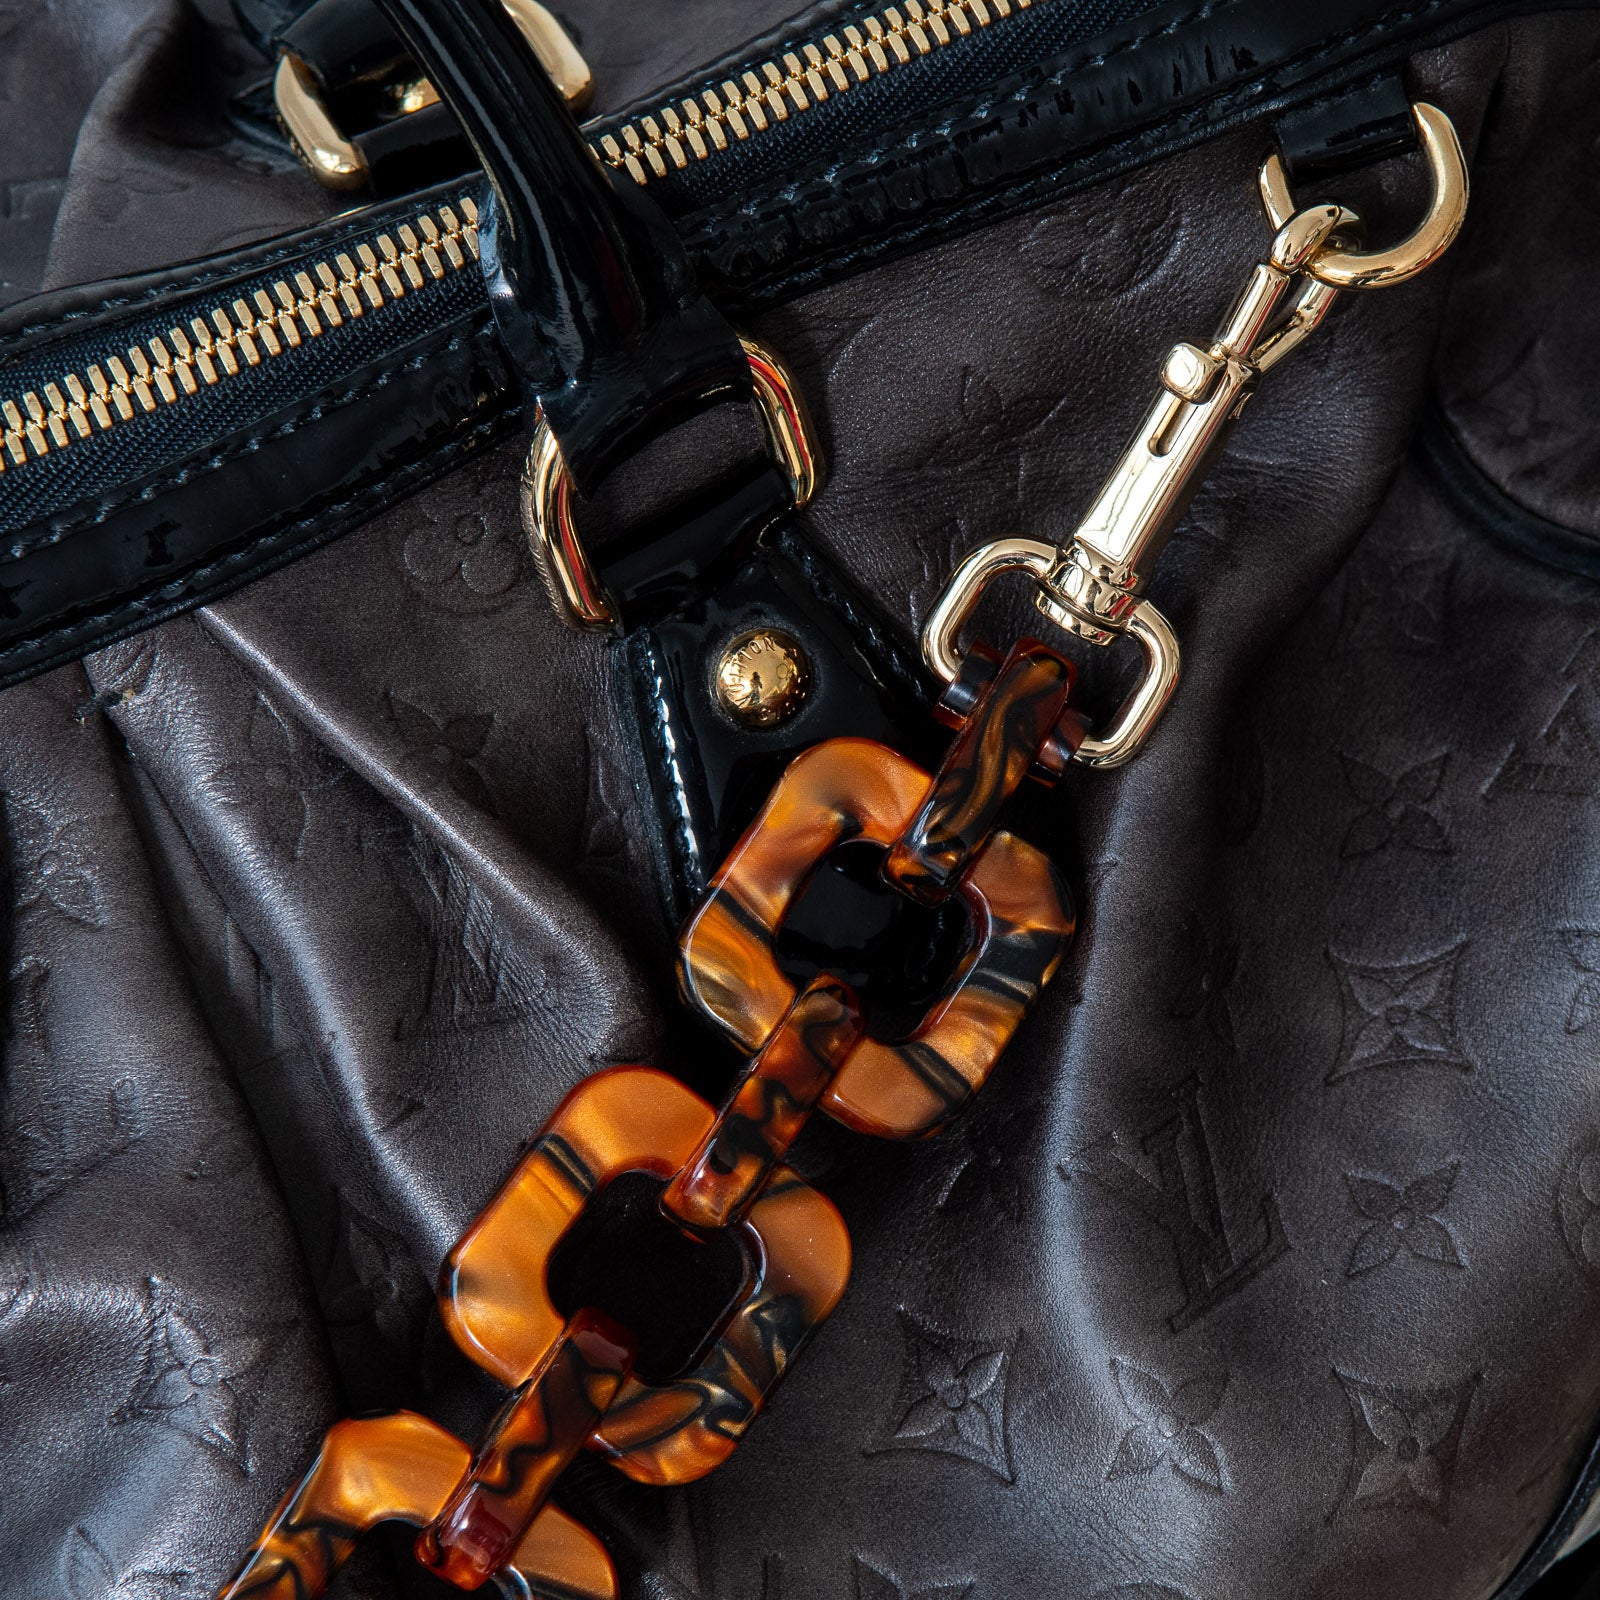 Louis Vuitton x Stephen Sprouse Brown Monogram And Black Patent Bag - EVEYSPRELOVED